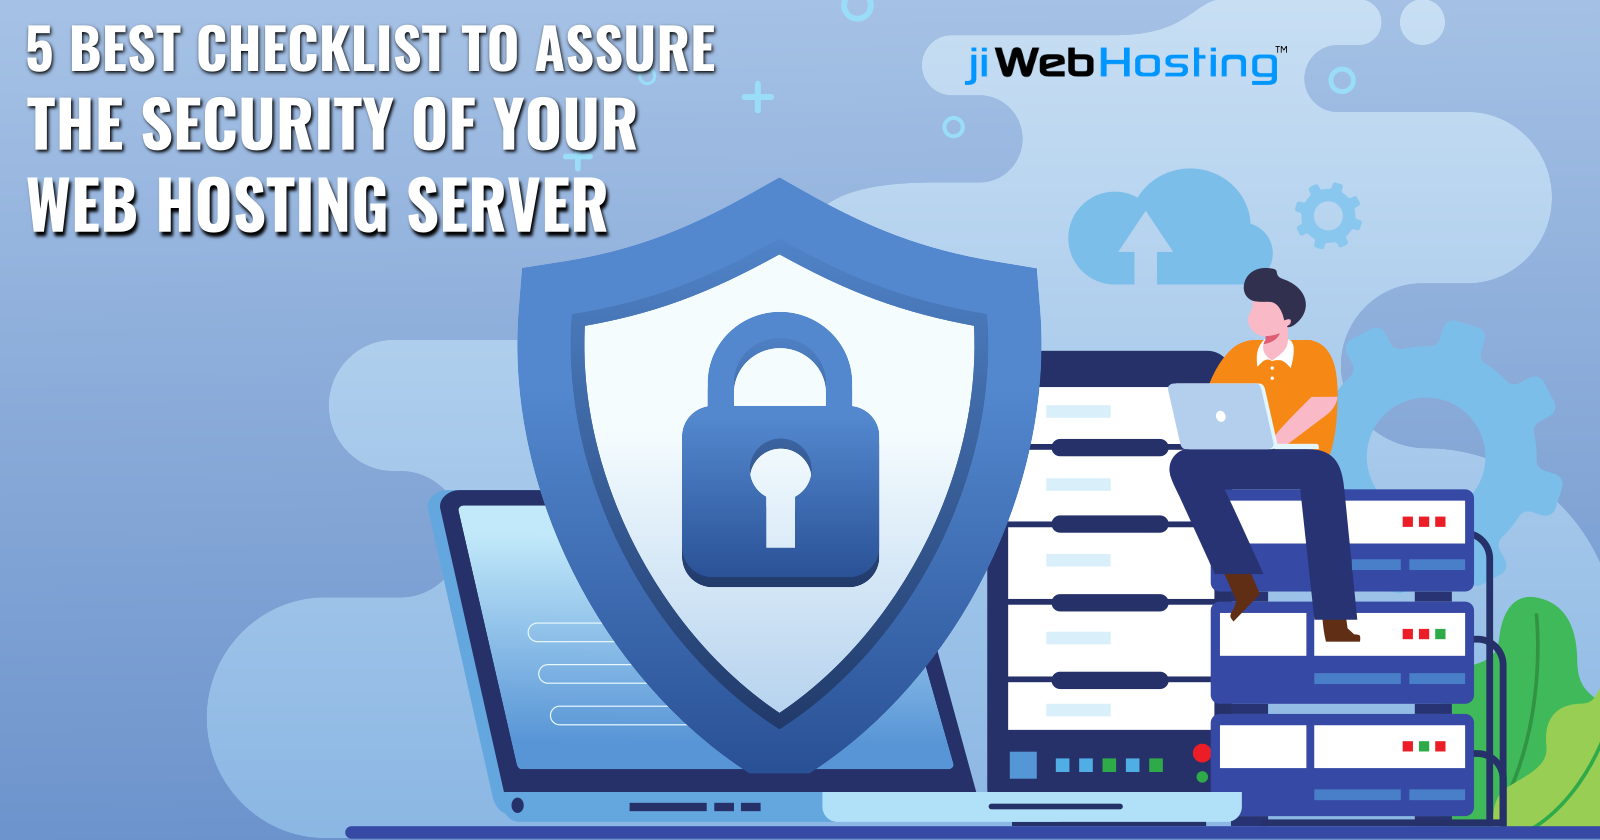 5 Best Checklist To Assure The Security of Your Web Hosting Server